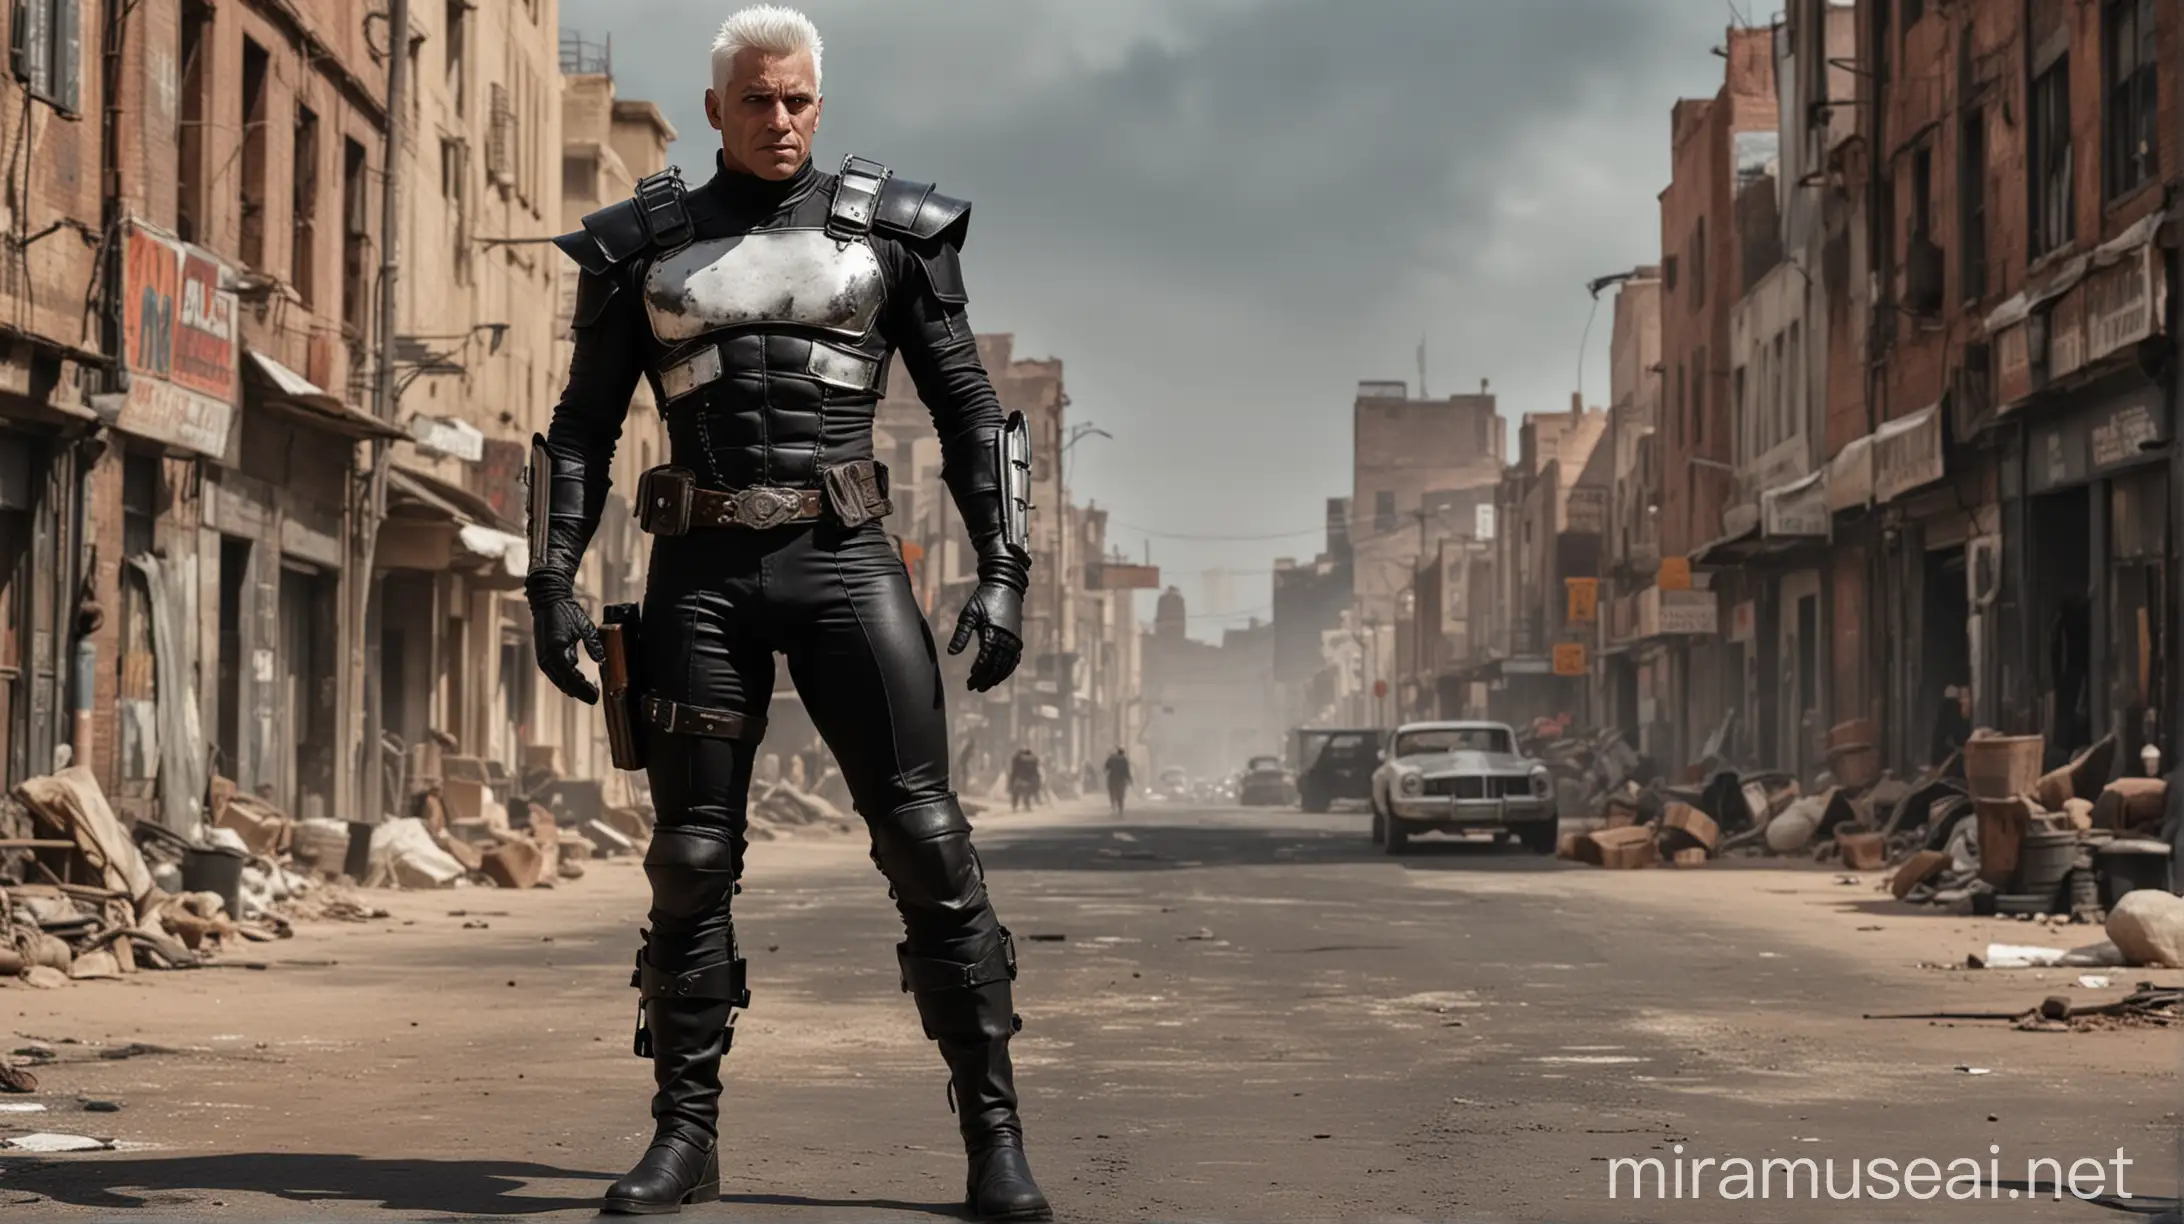 realistic man white hair black suit armor lycra superhero costume1950,complete body,boots,feets white hair ,black suit spandex armor lycra spandex,velvet,superhero ,1950,style,vintage,1945,
background future apocalyptic city mad max roof 35mm